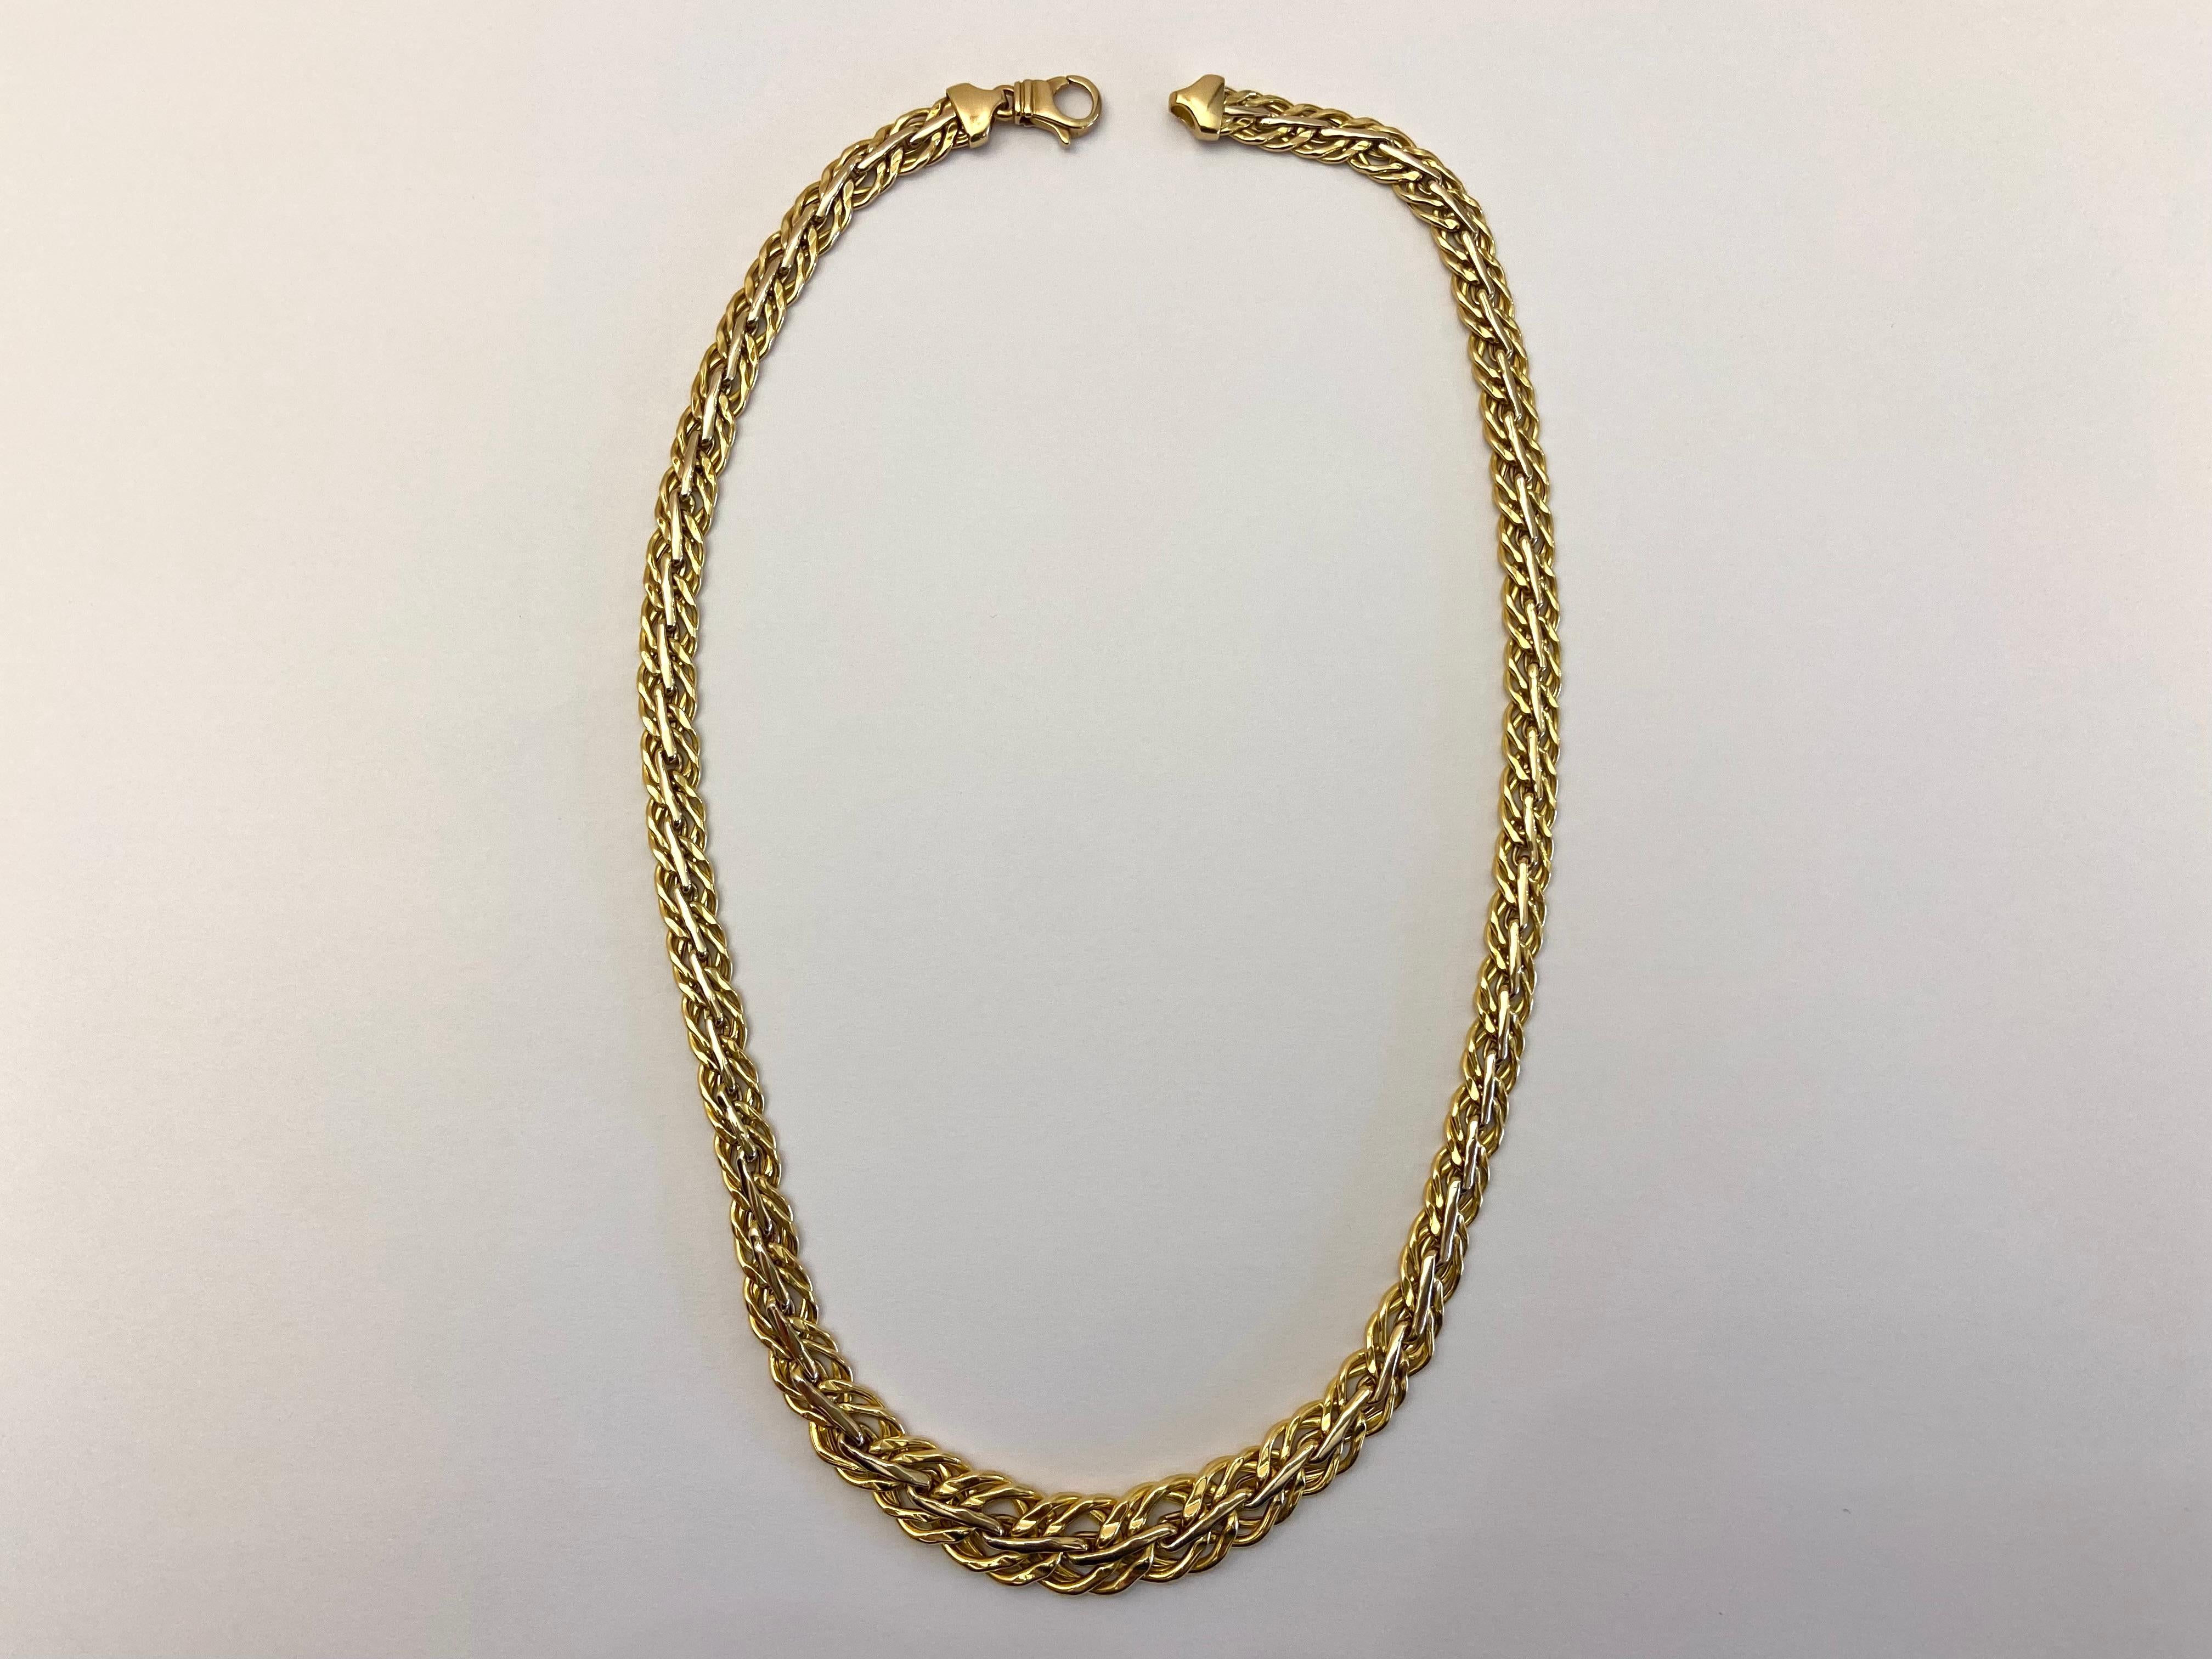 18 kt gold necklace, 45 cm long. 11 mm wide in the central part; It weighs 20.5 grams; Lobster clasp closure; Stamped with state trademarks, shipped in an elegant gift box.